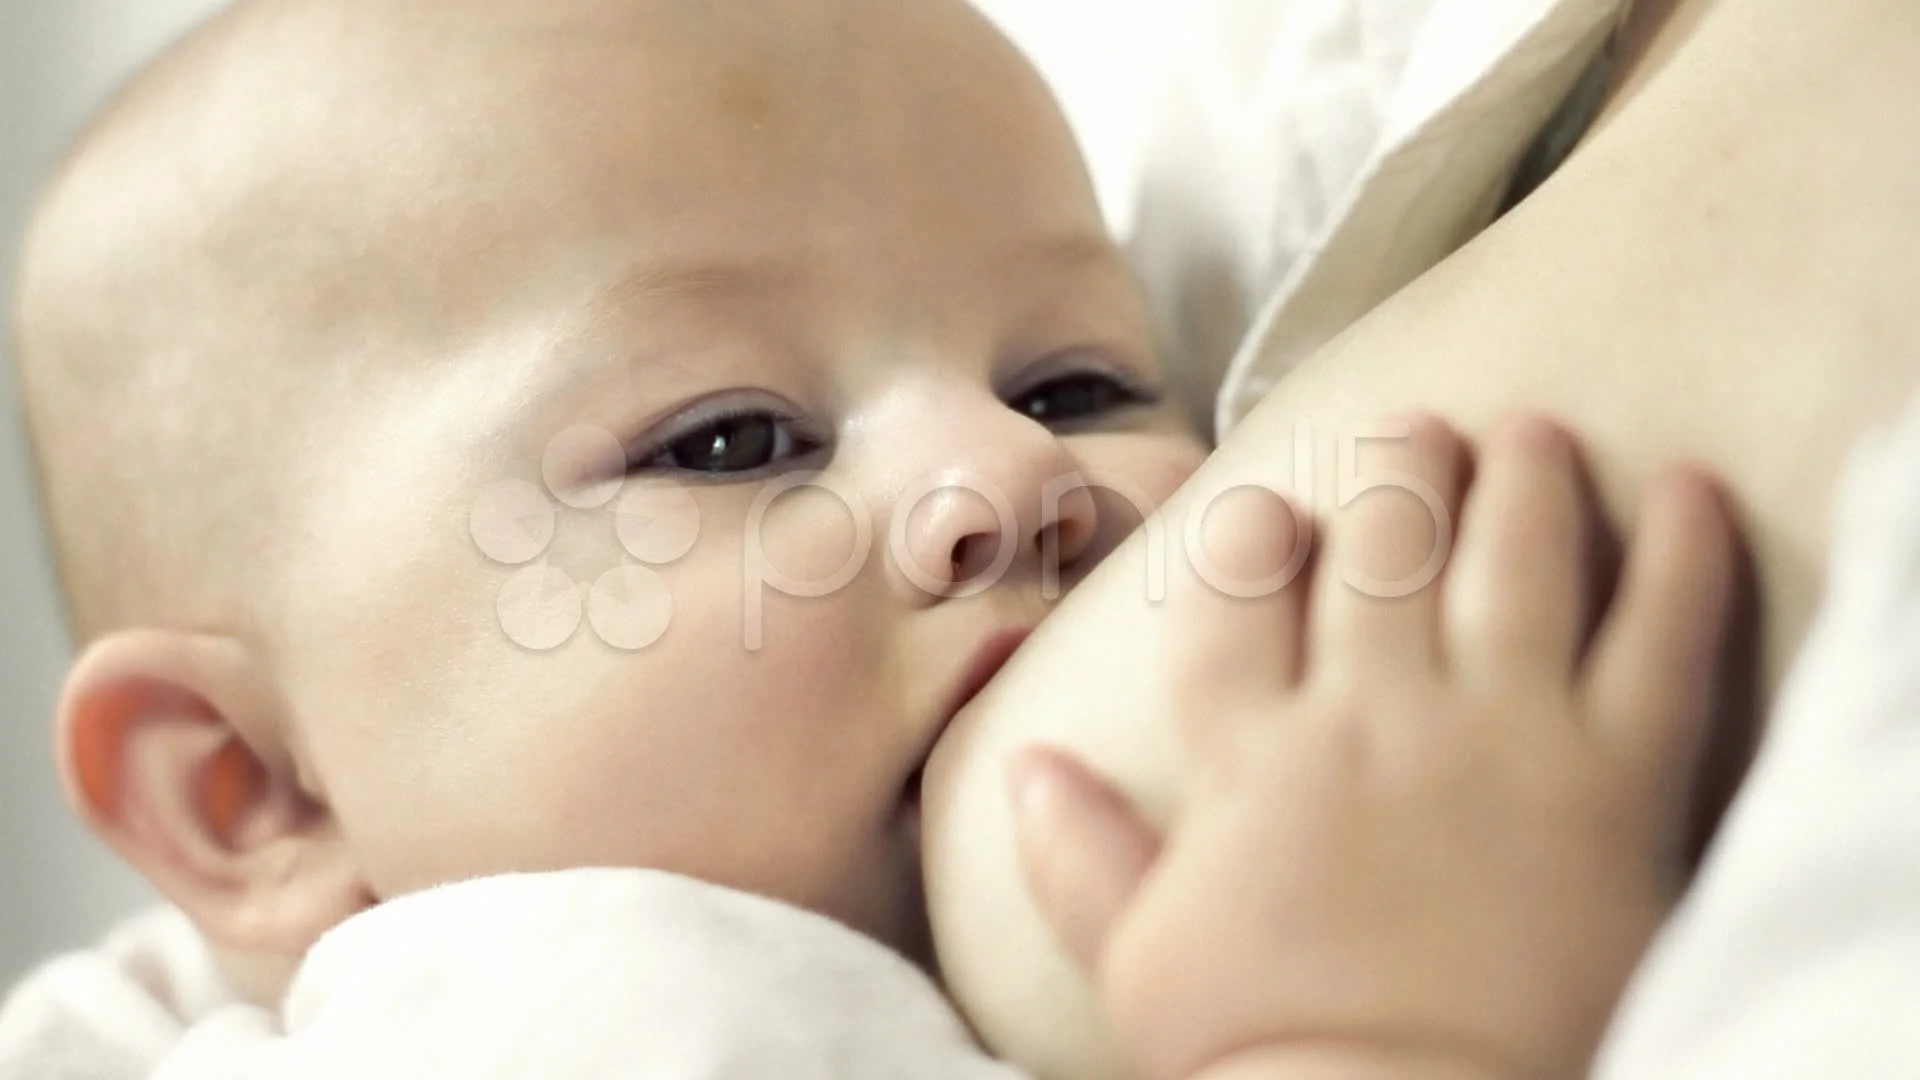 Download free photo of Breastfeeding,breast,boy,breastfeeding,free pictures  - from needpix.com